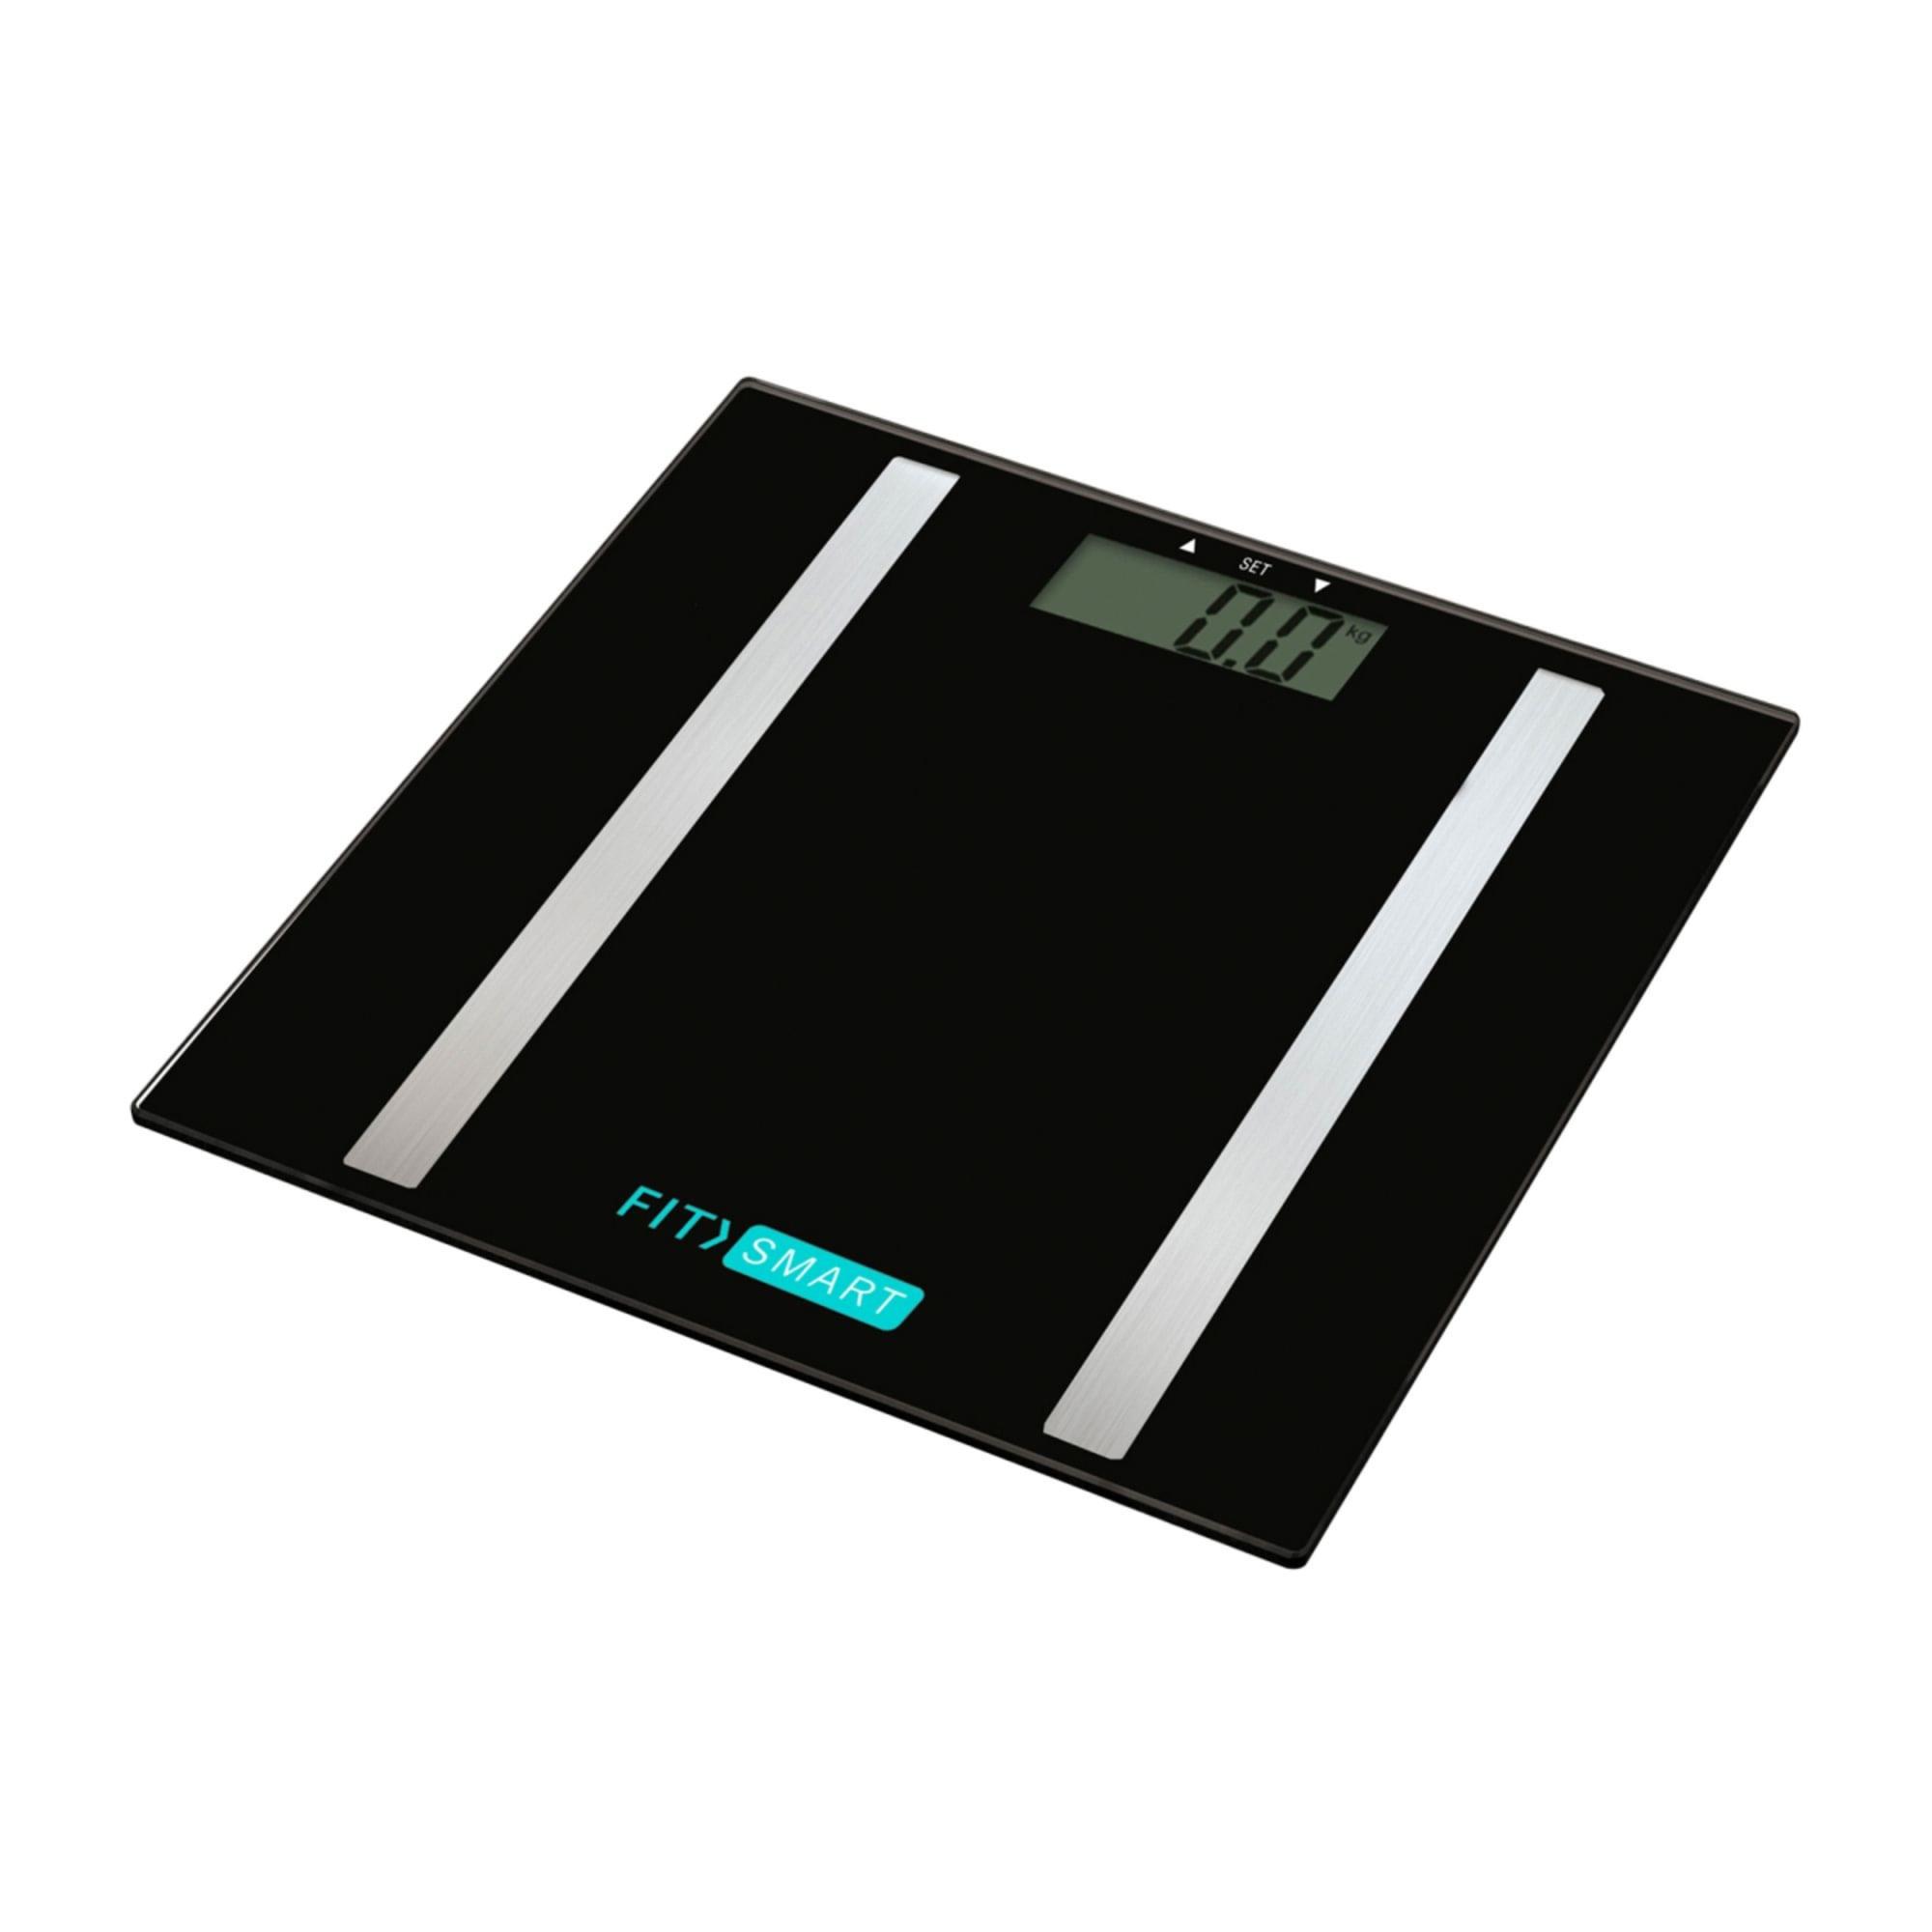 FitSmart Electronic Body Fat Scale Image 2